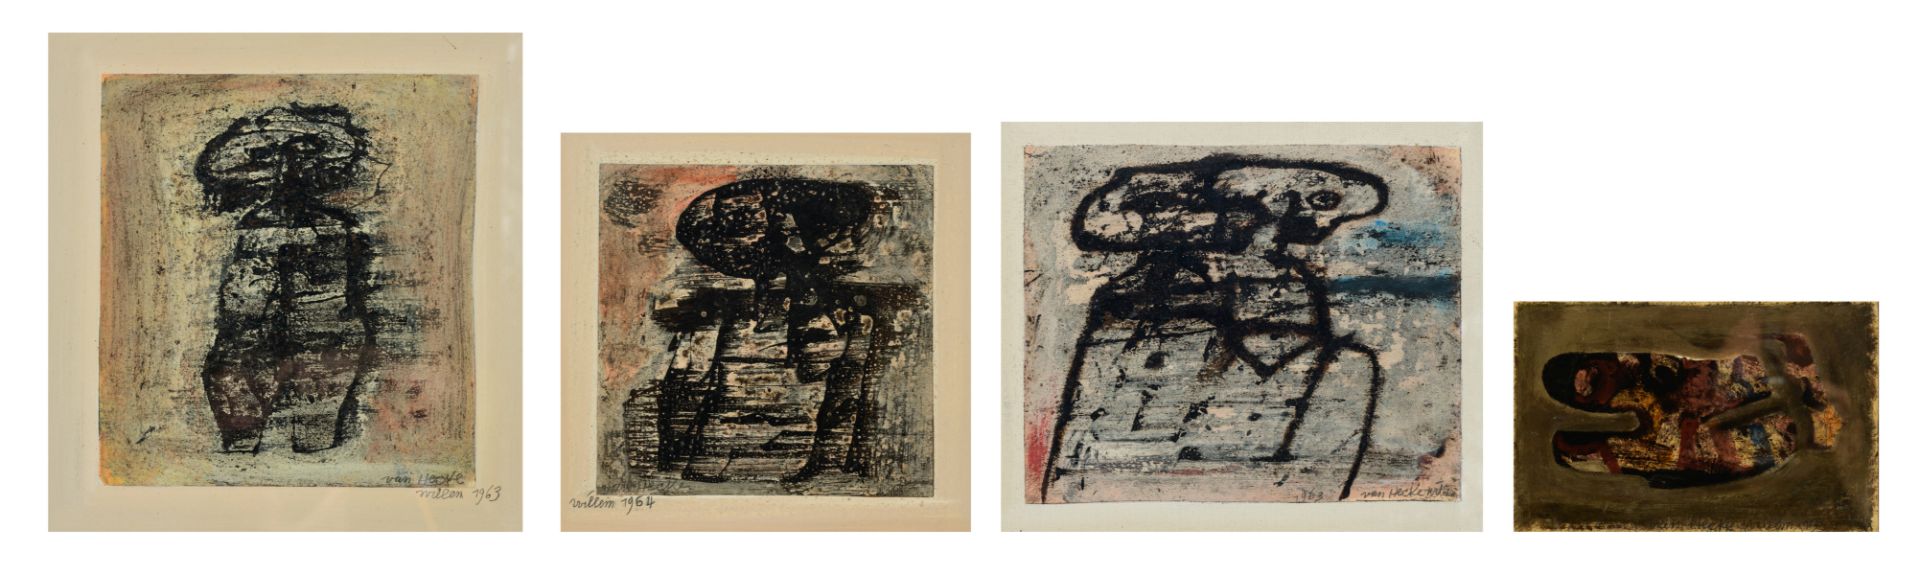 Van Hecke W., four untitled works, dated 1957, 1963, 1963 and 1964, mixed media, 34 x 40 - 40 x 45 c